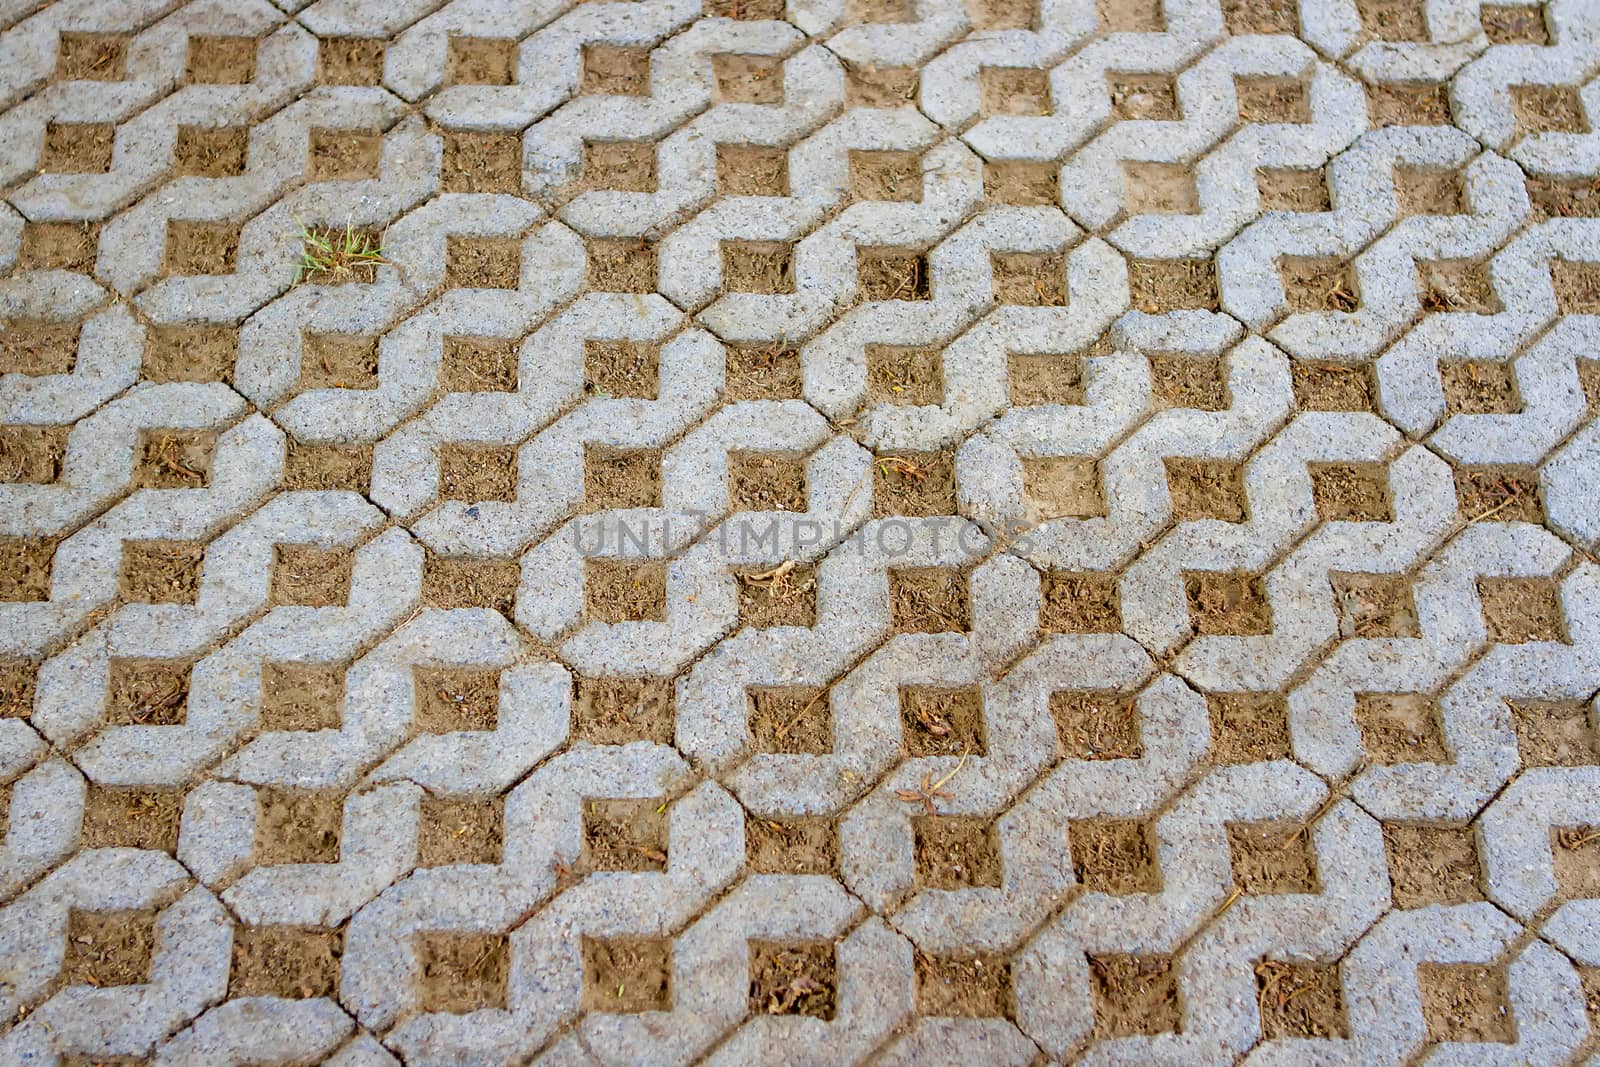 Brick floor with holes and grass